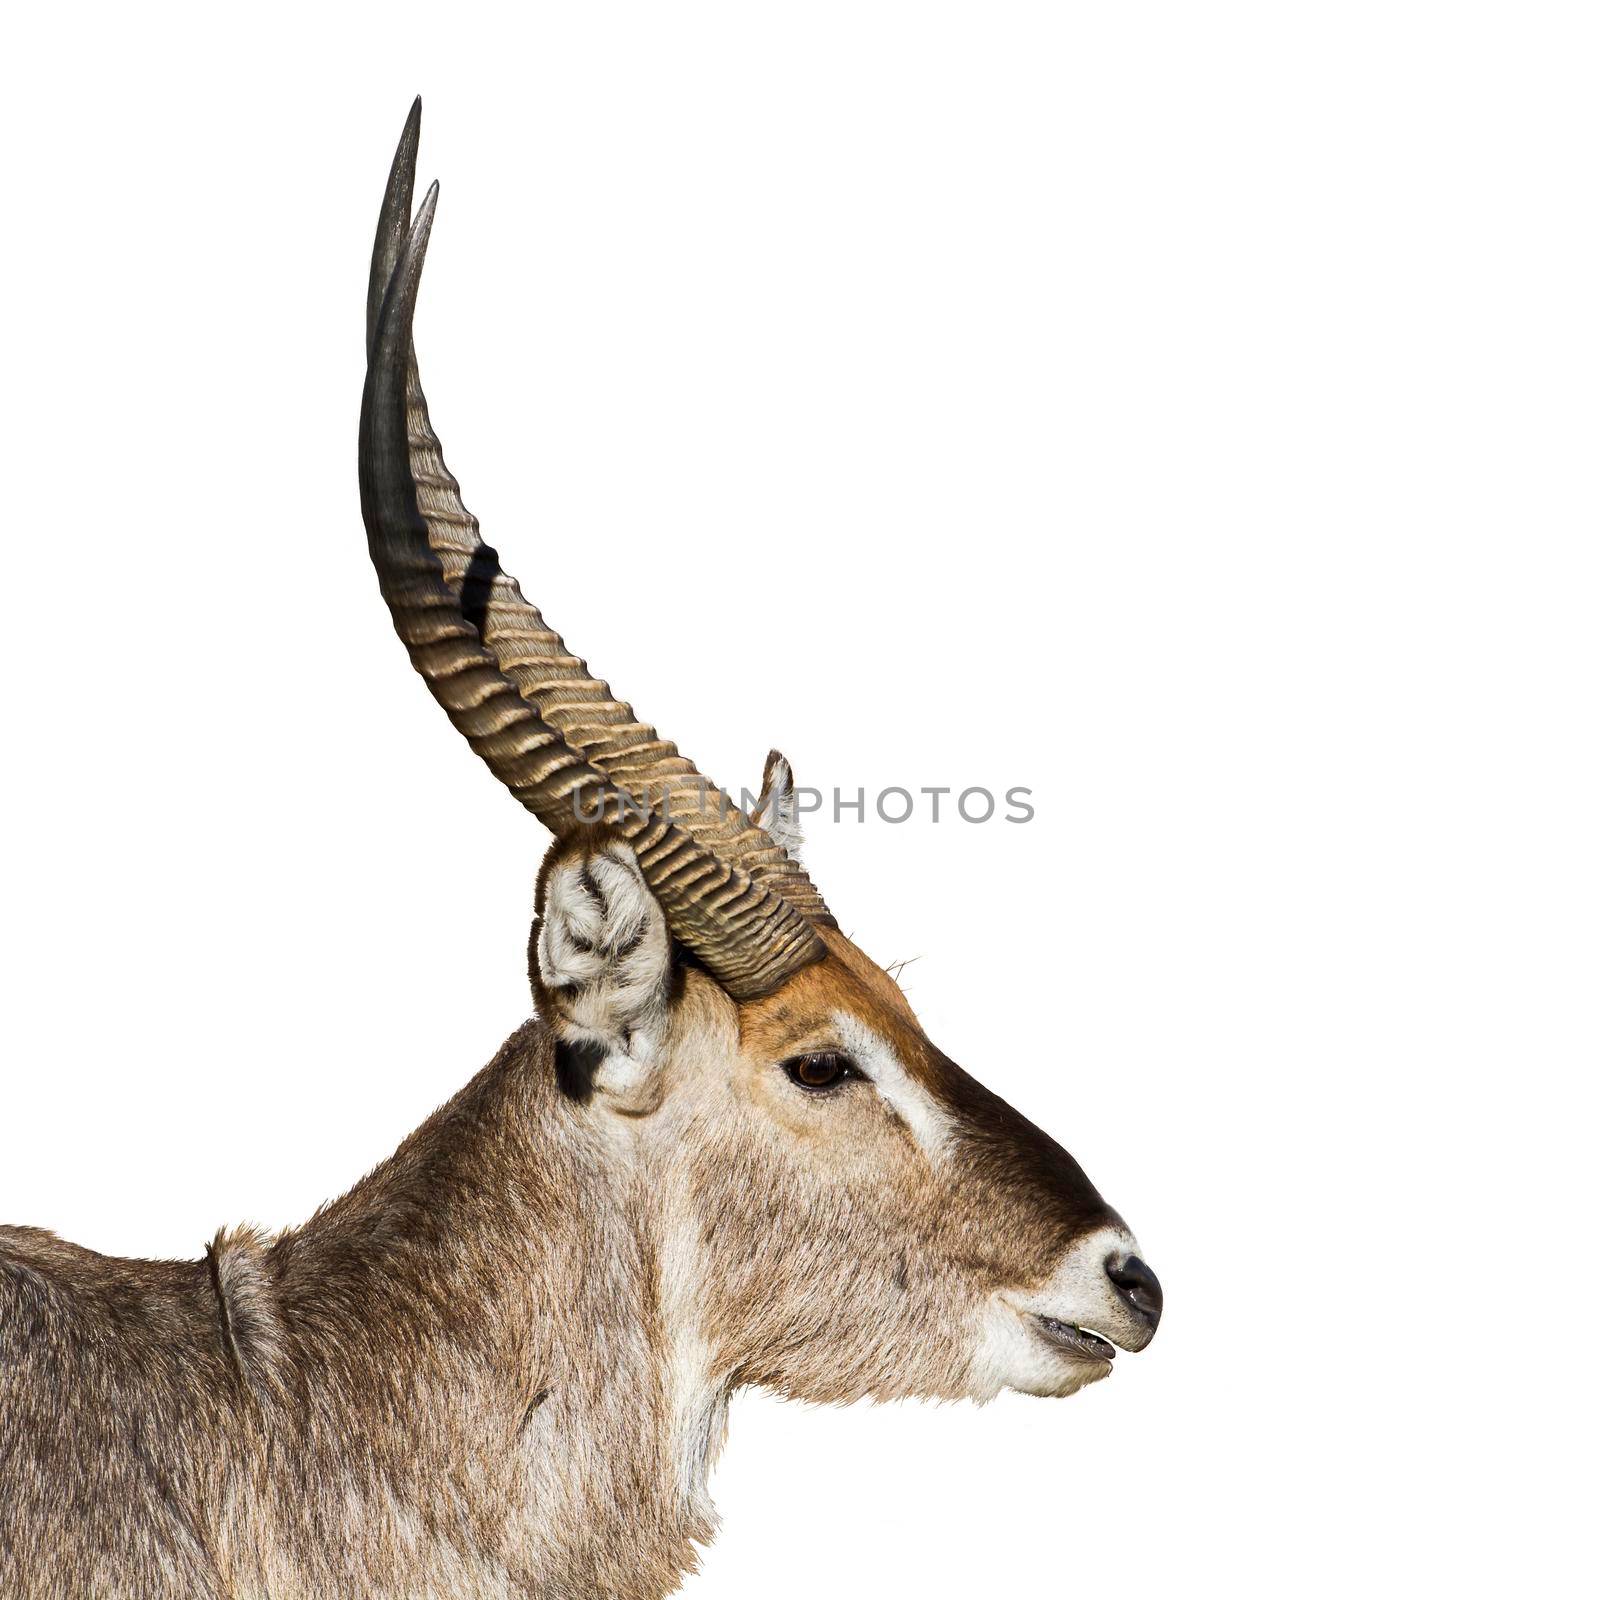 Waterbuck in Kruger National park by PACOCOMO